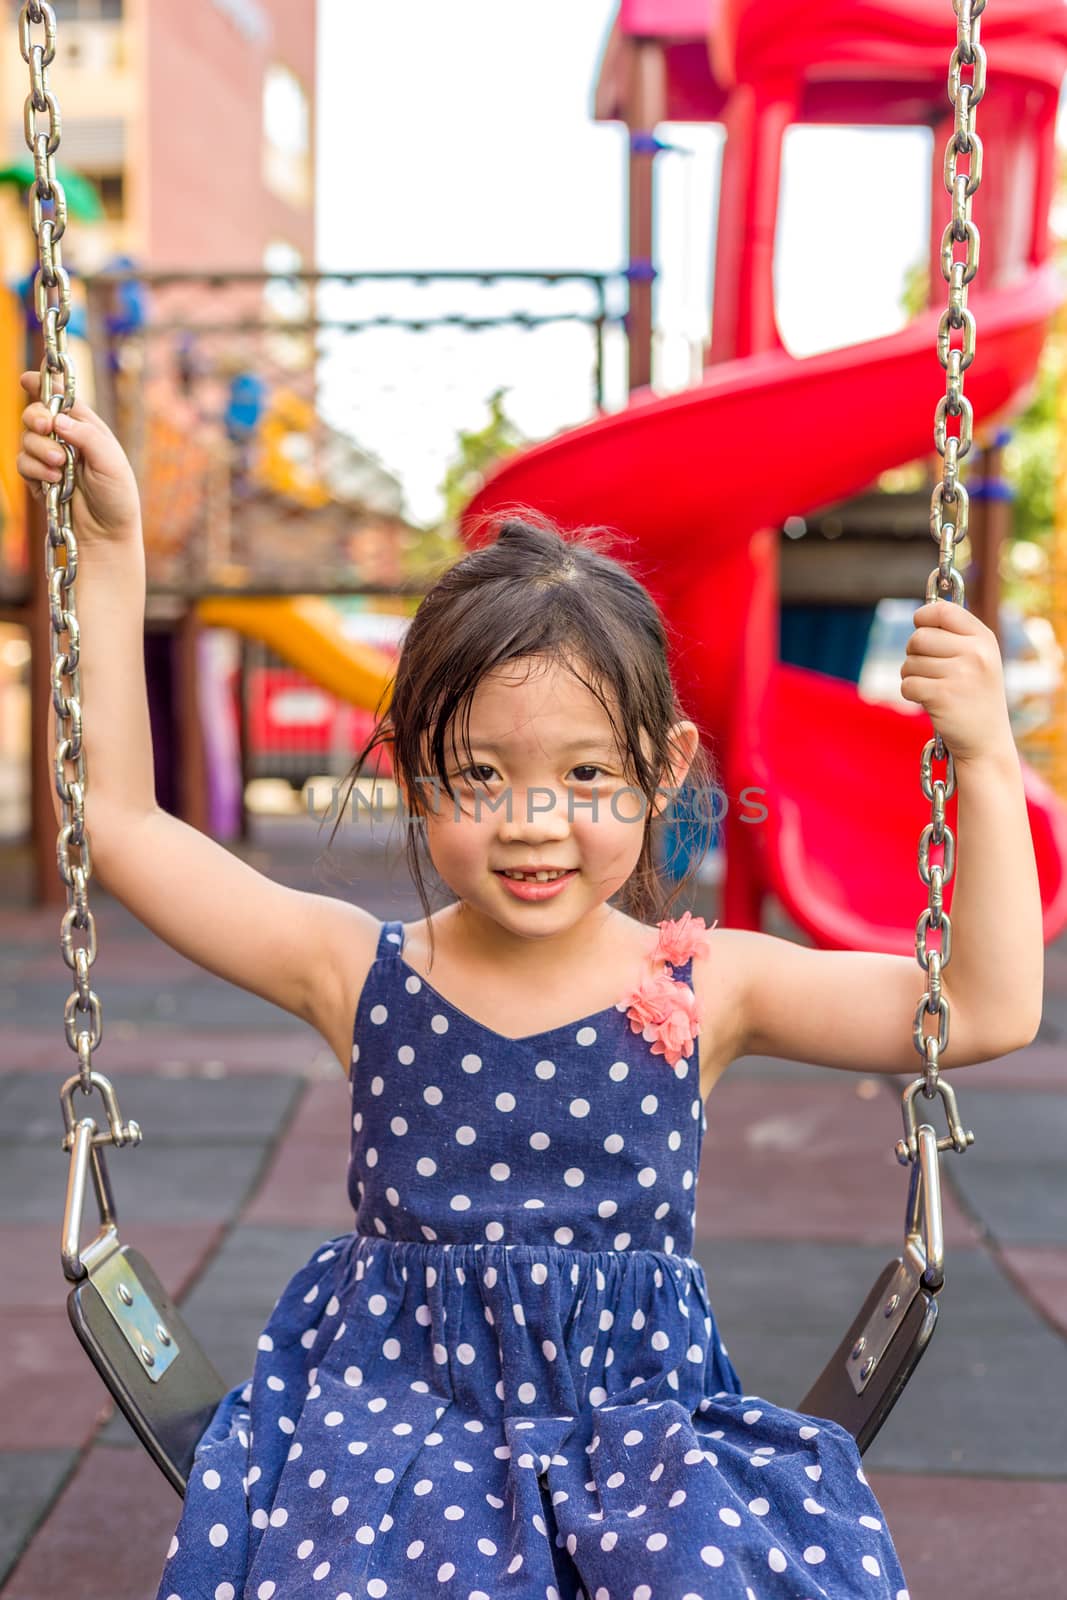 Young girl playing swing on playground with happiness.